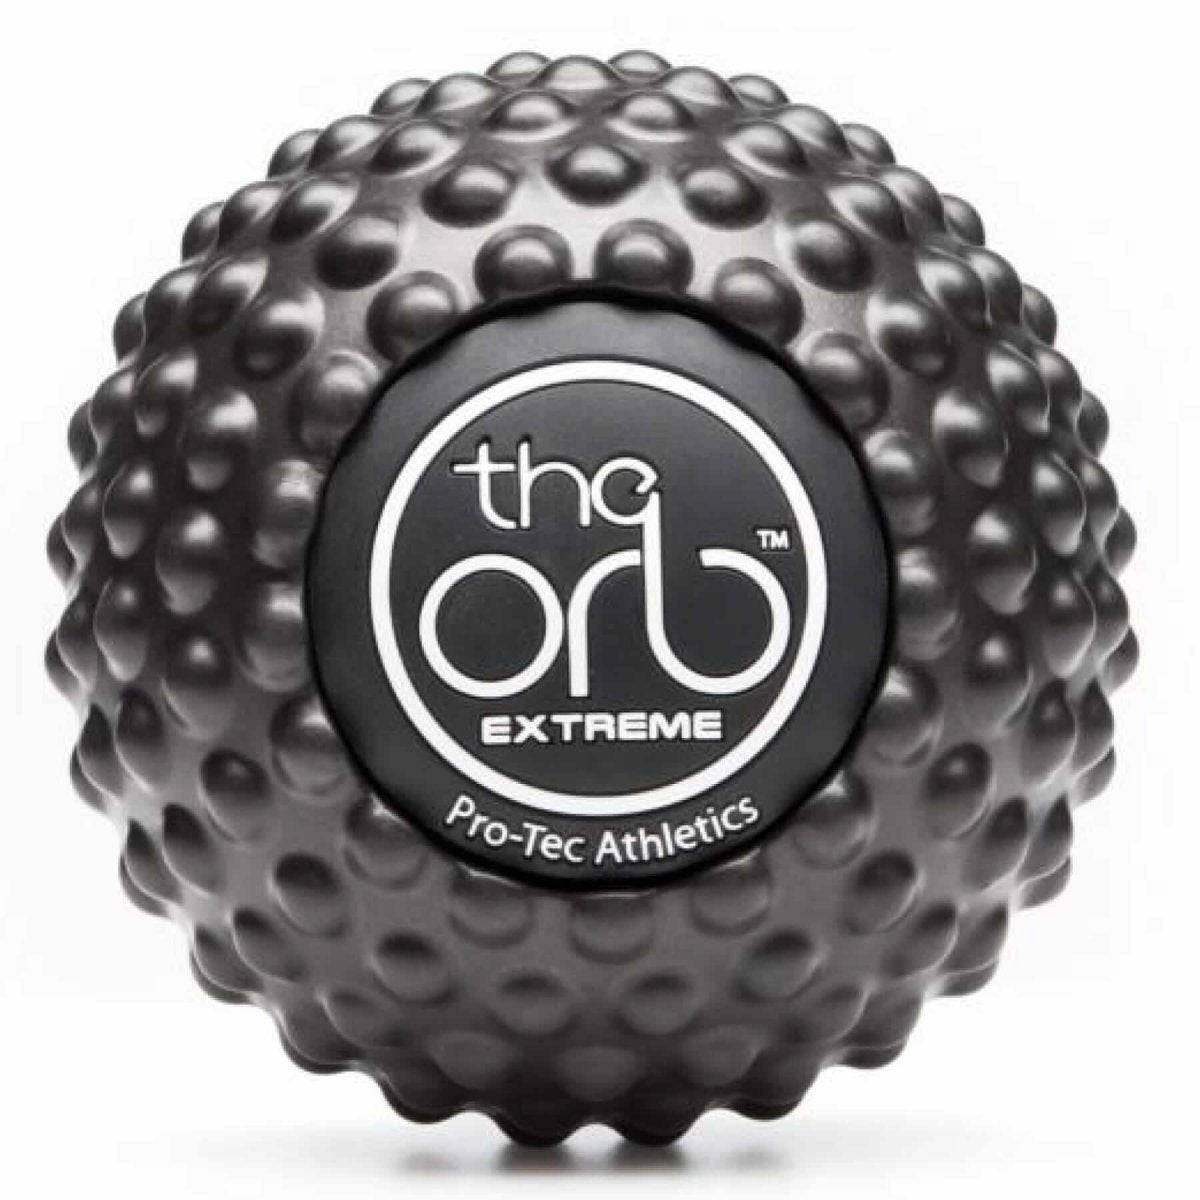 PTOrb Extreme F The Orb Massage Ball 5"" Extreme